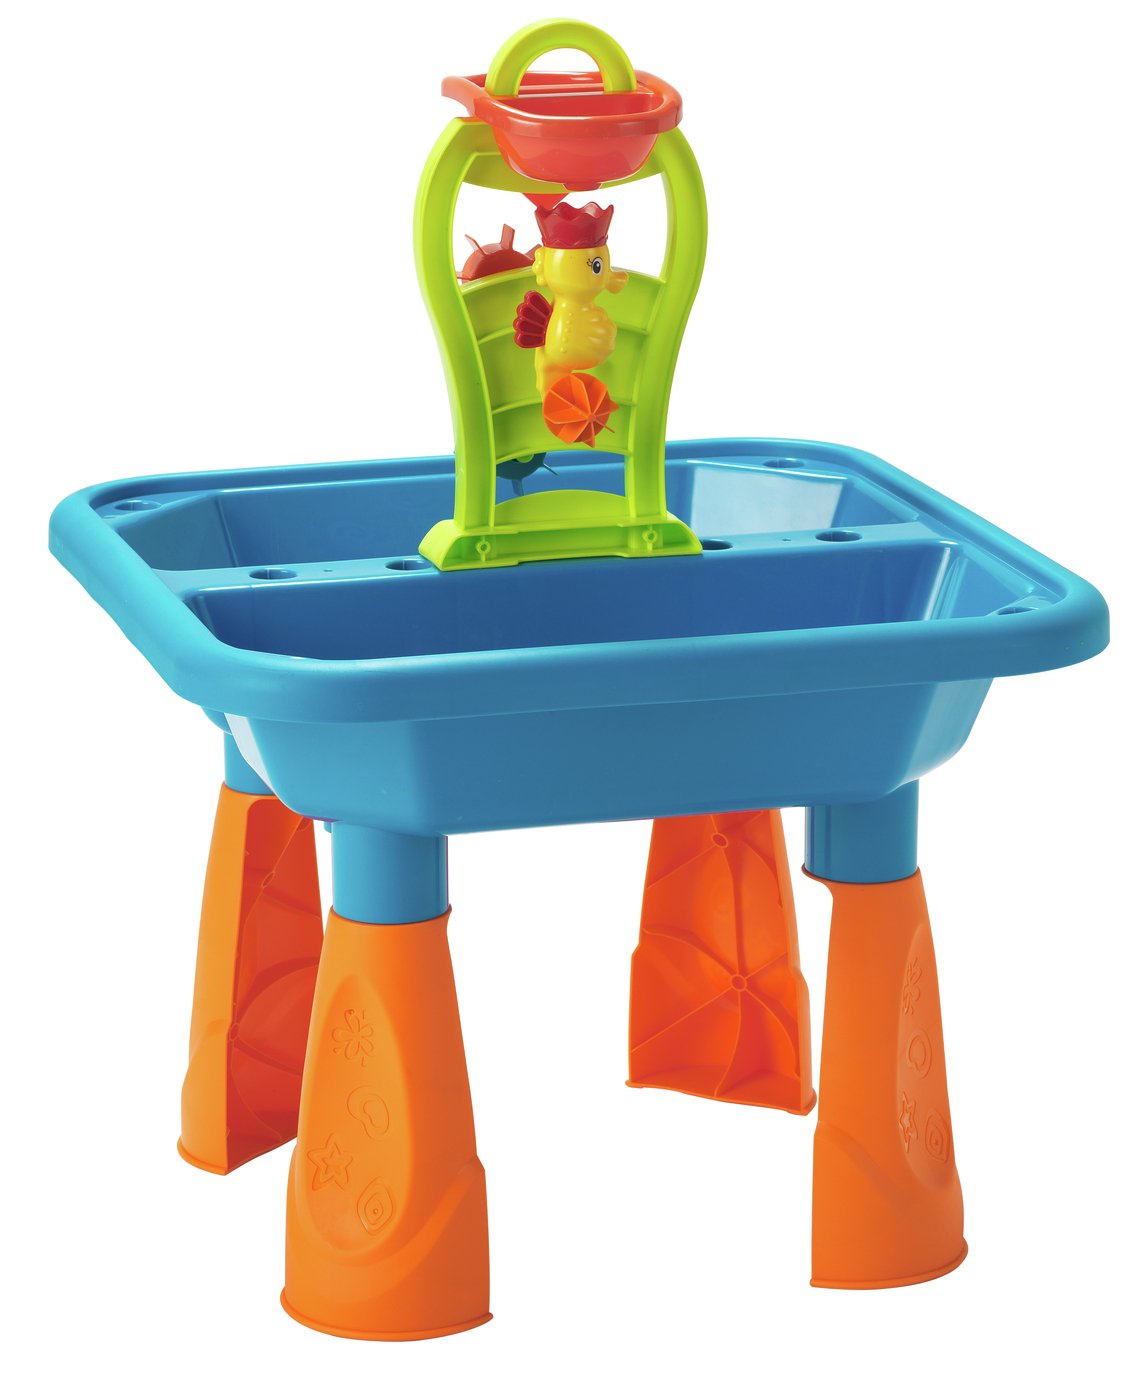 chad valley sand and water table sainsburys